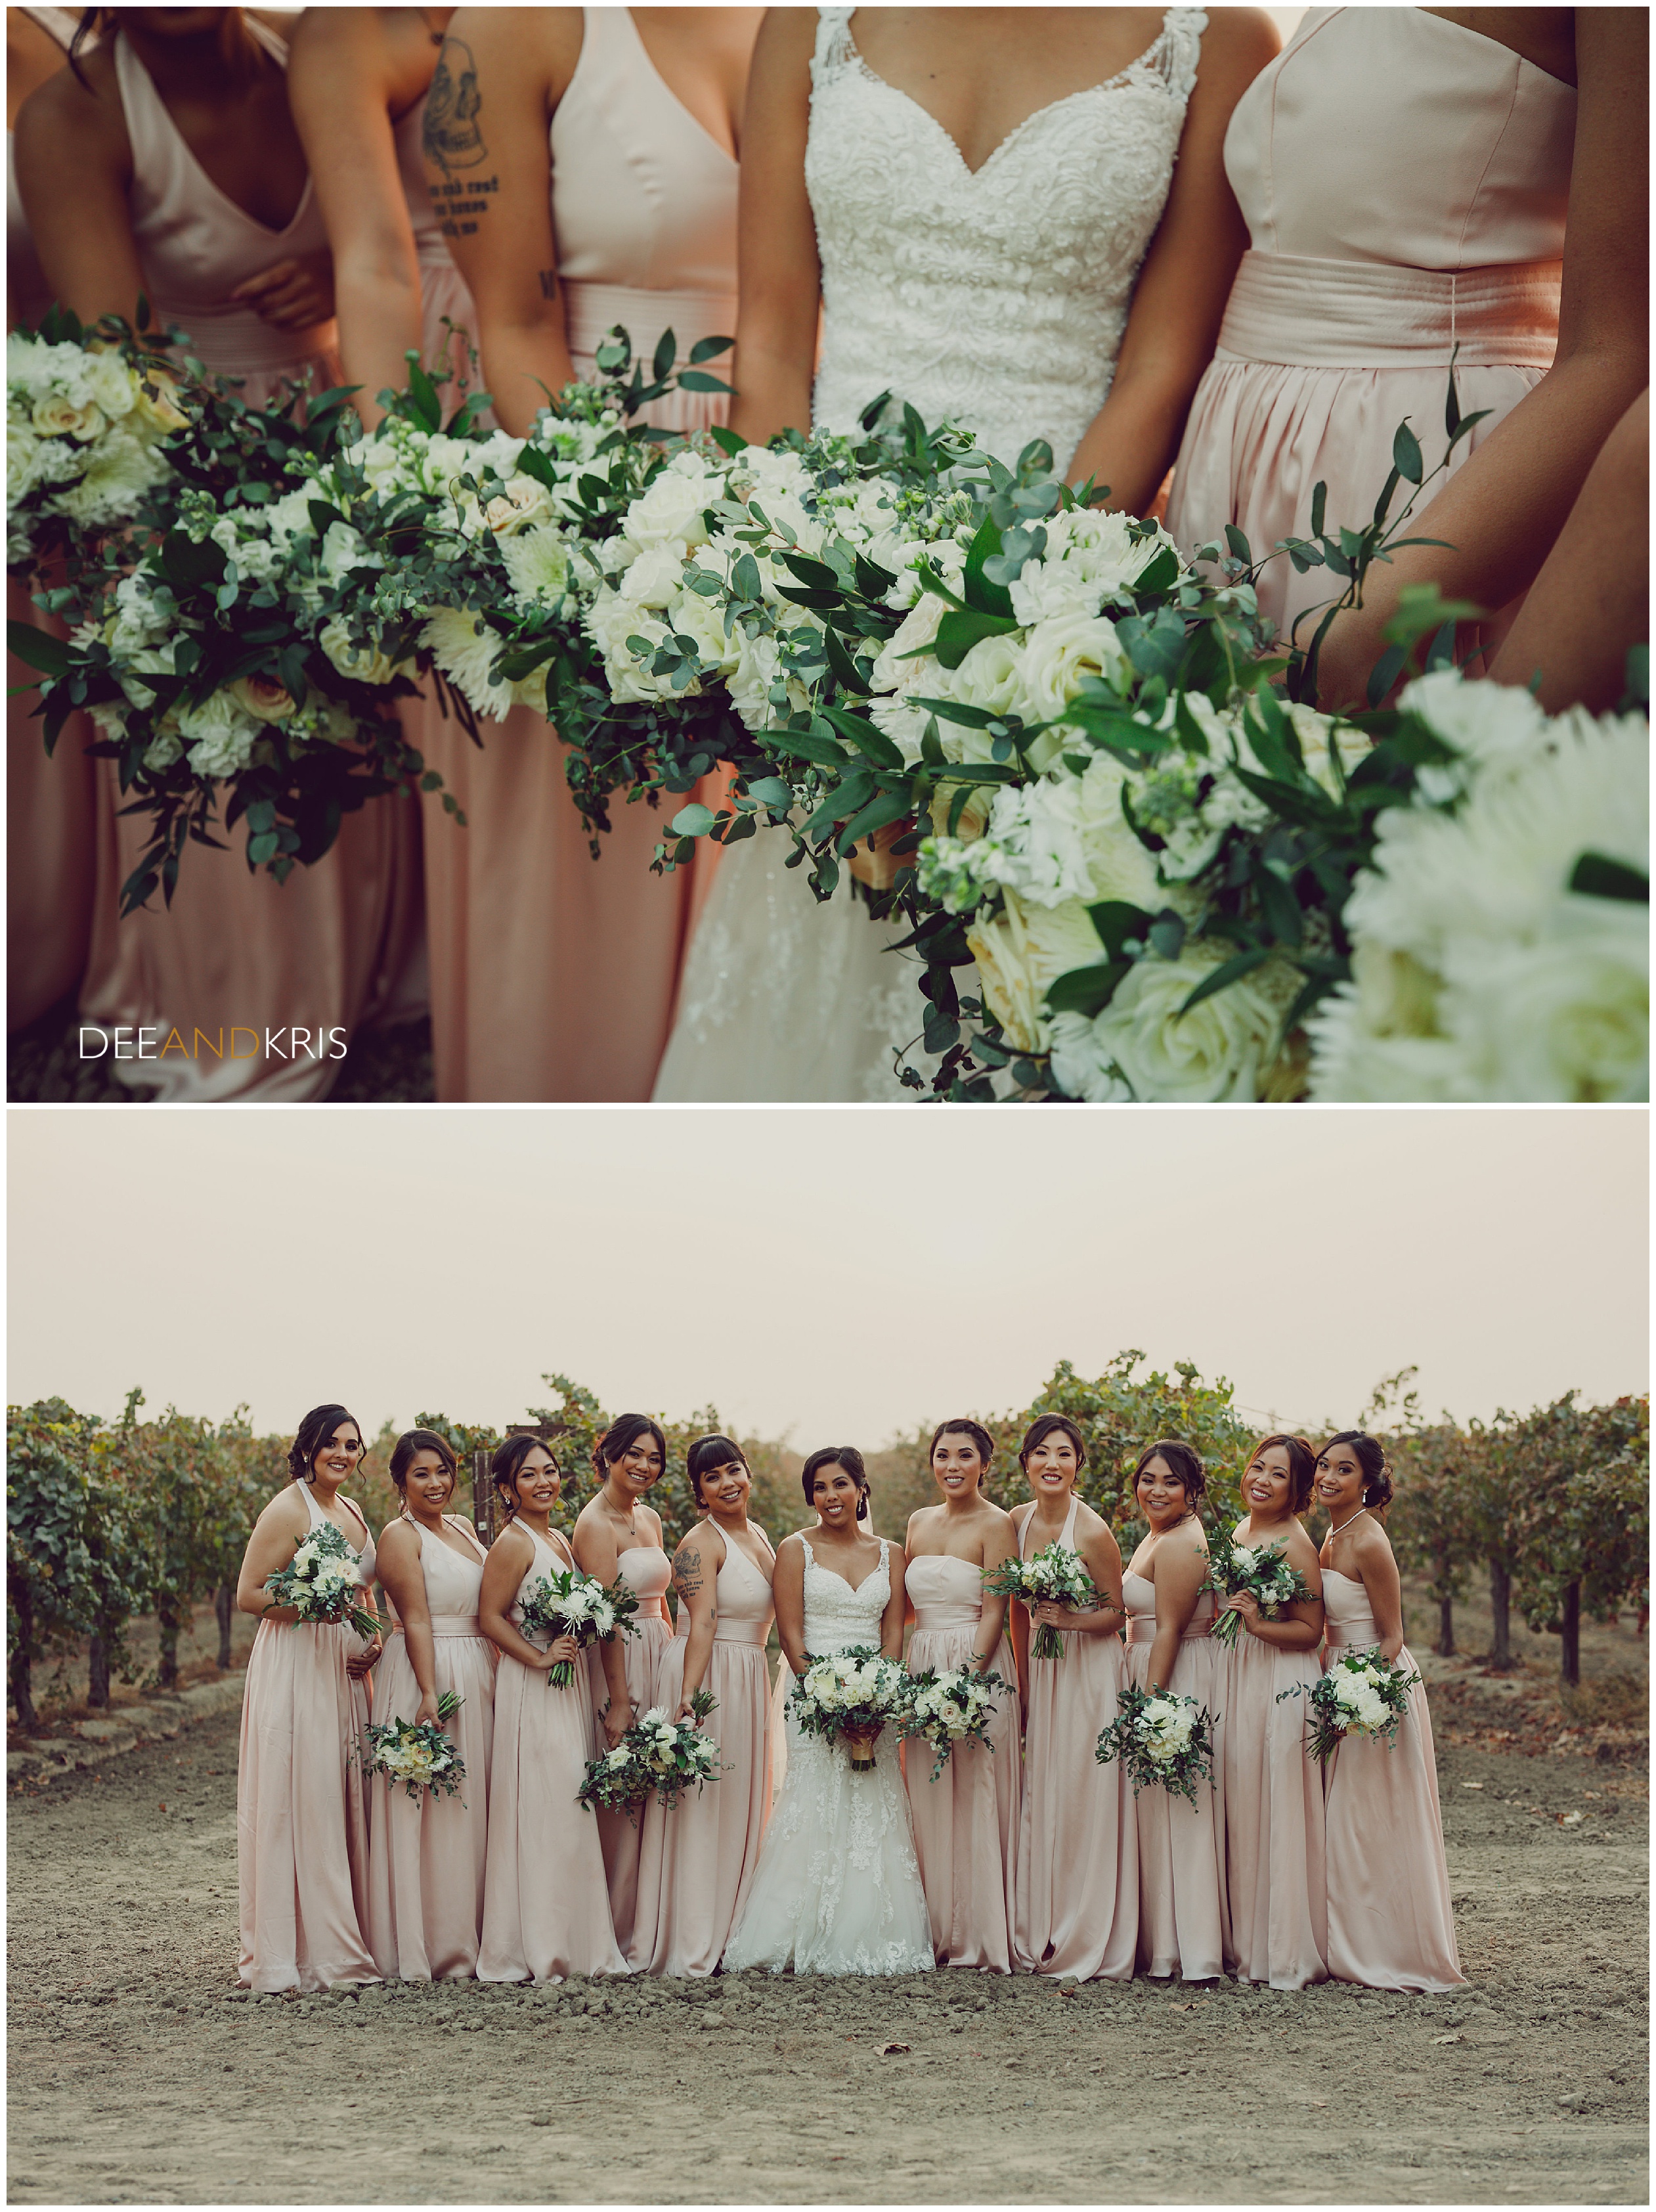 Sacramento Wedding photographers Dee and Kris photograph bridal party at the Old Sugar Mill, wedding flowers by Wild Flowers Design Group 